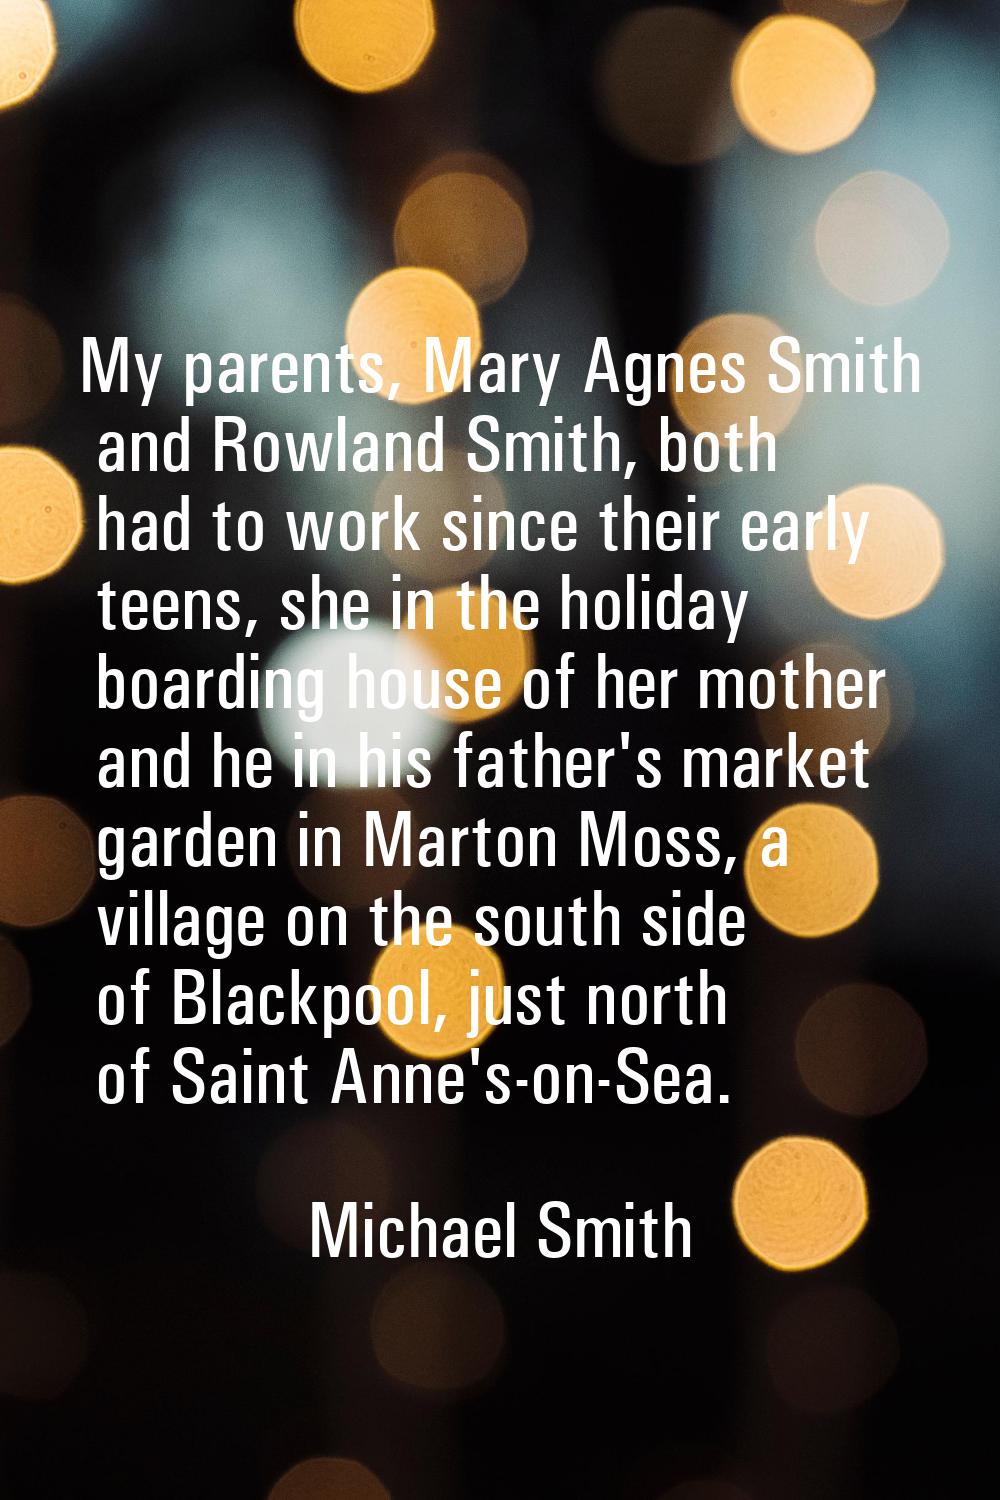 My parents, Mary Agnes Smith and Rowland Smith, both had to work since their early teens, she in th